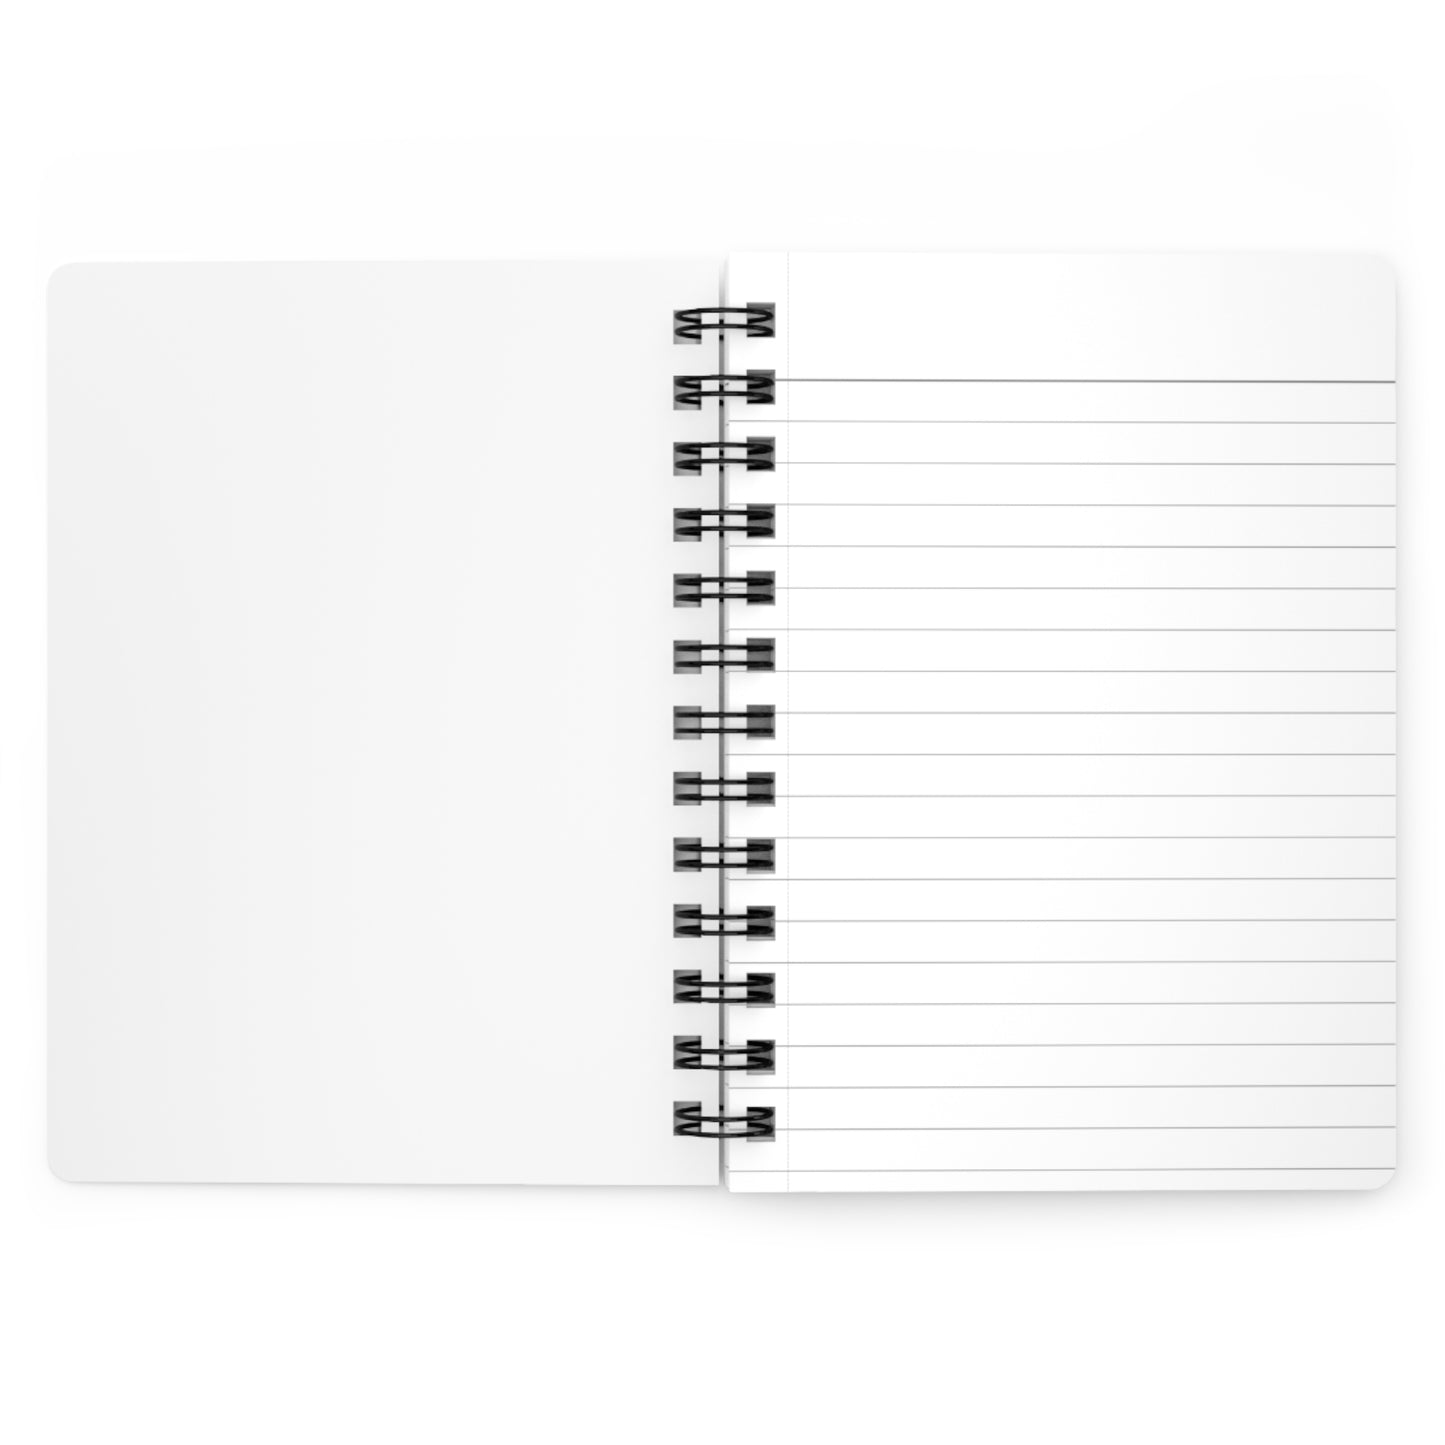 Boats 03 - Spiral Bound Journal One Size